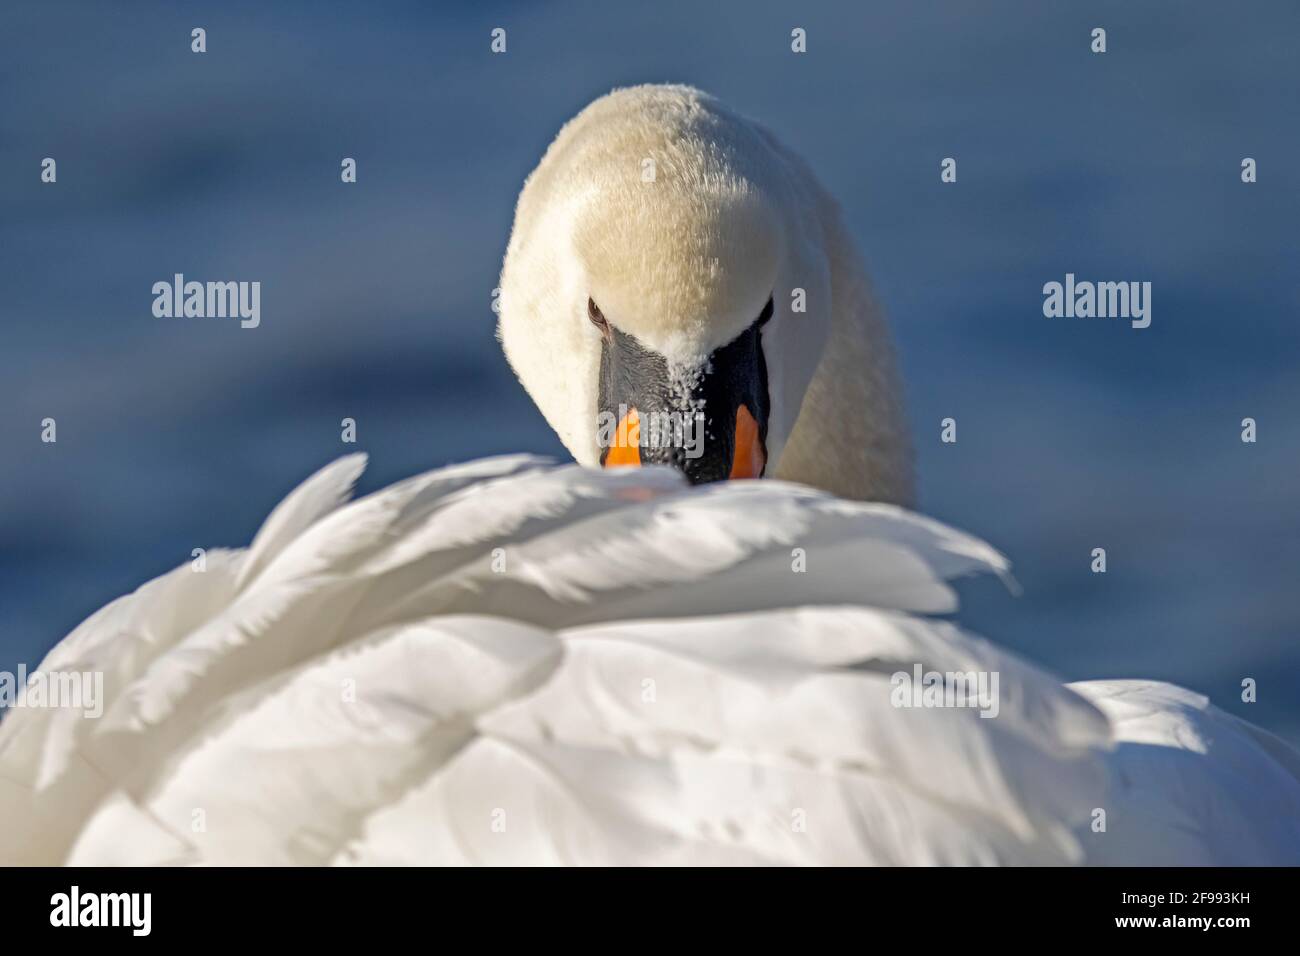 Mute swan (Cygnus olor) in the plumage care, animal portrait, close up, Germany, Stock Photo